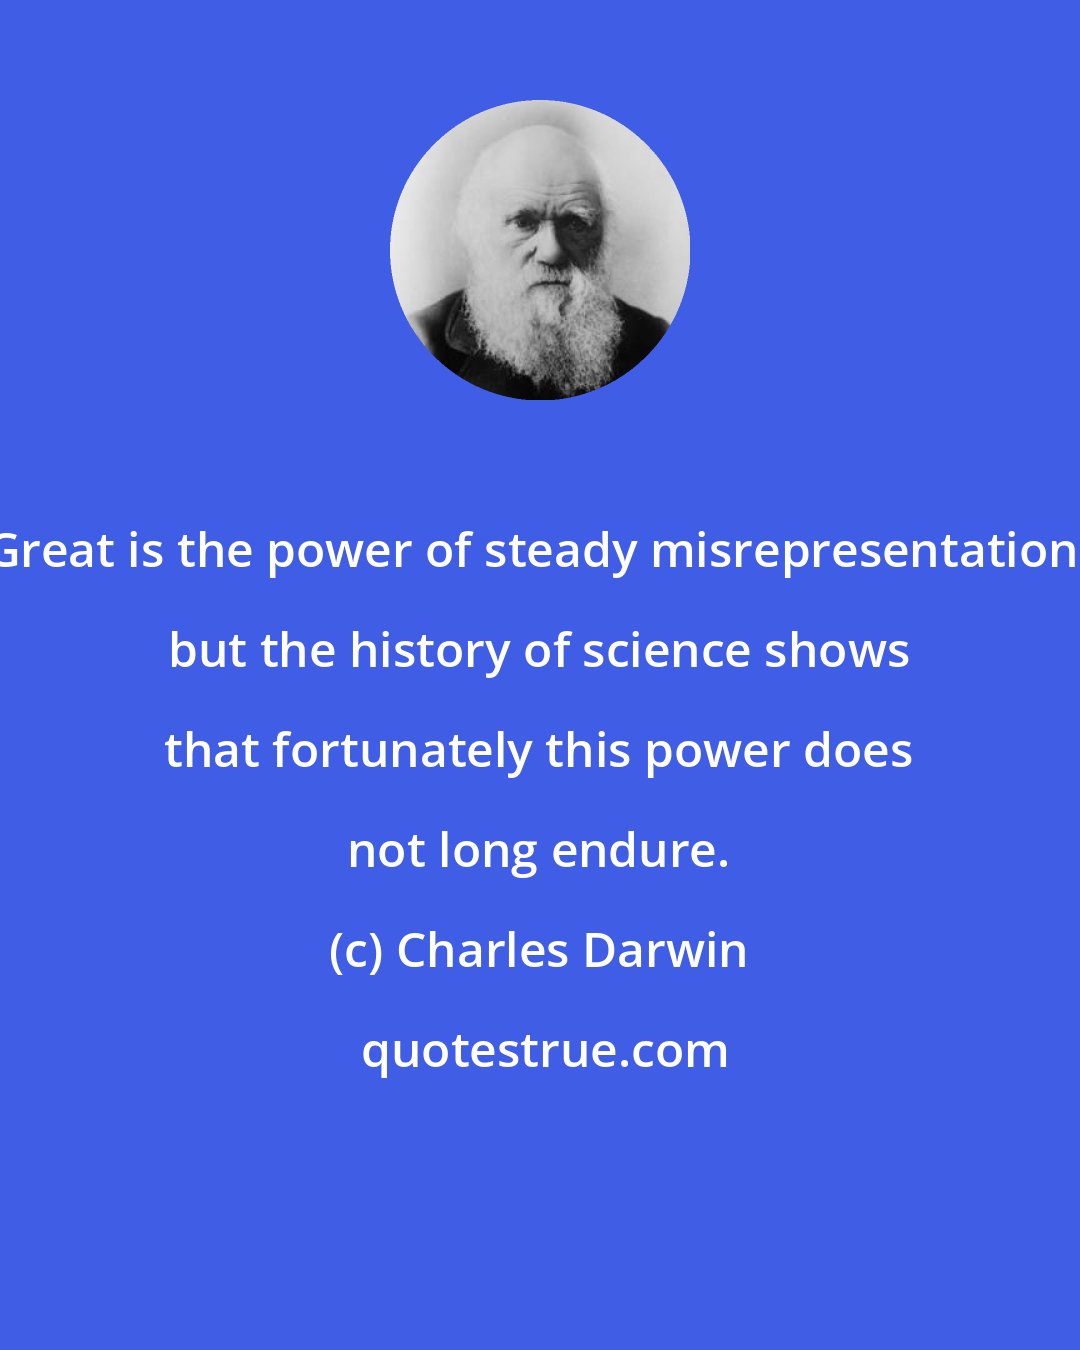 Charles Darwin: Great is the power of steady misrepresentation; but the history of science shows that fortunately this power does not long endure.